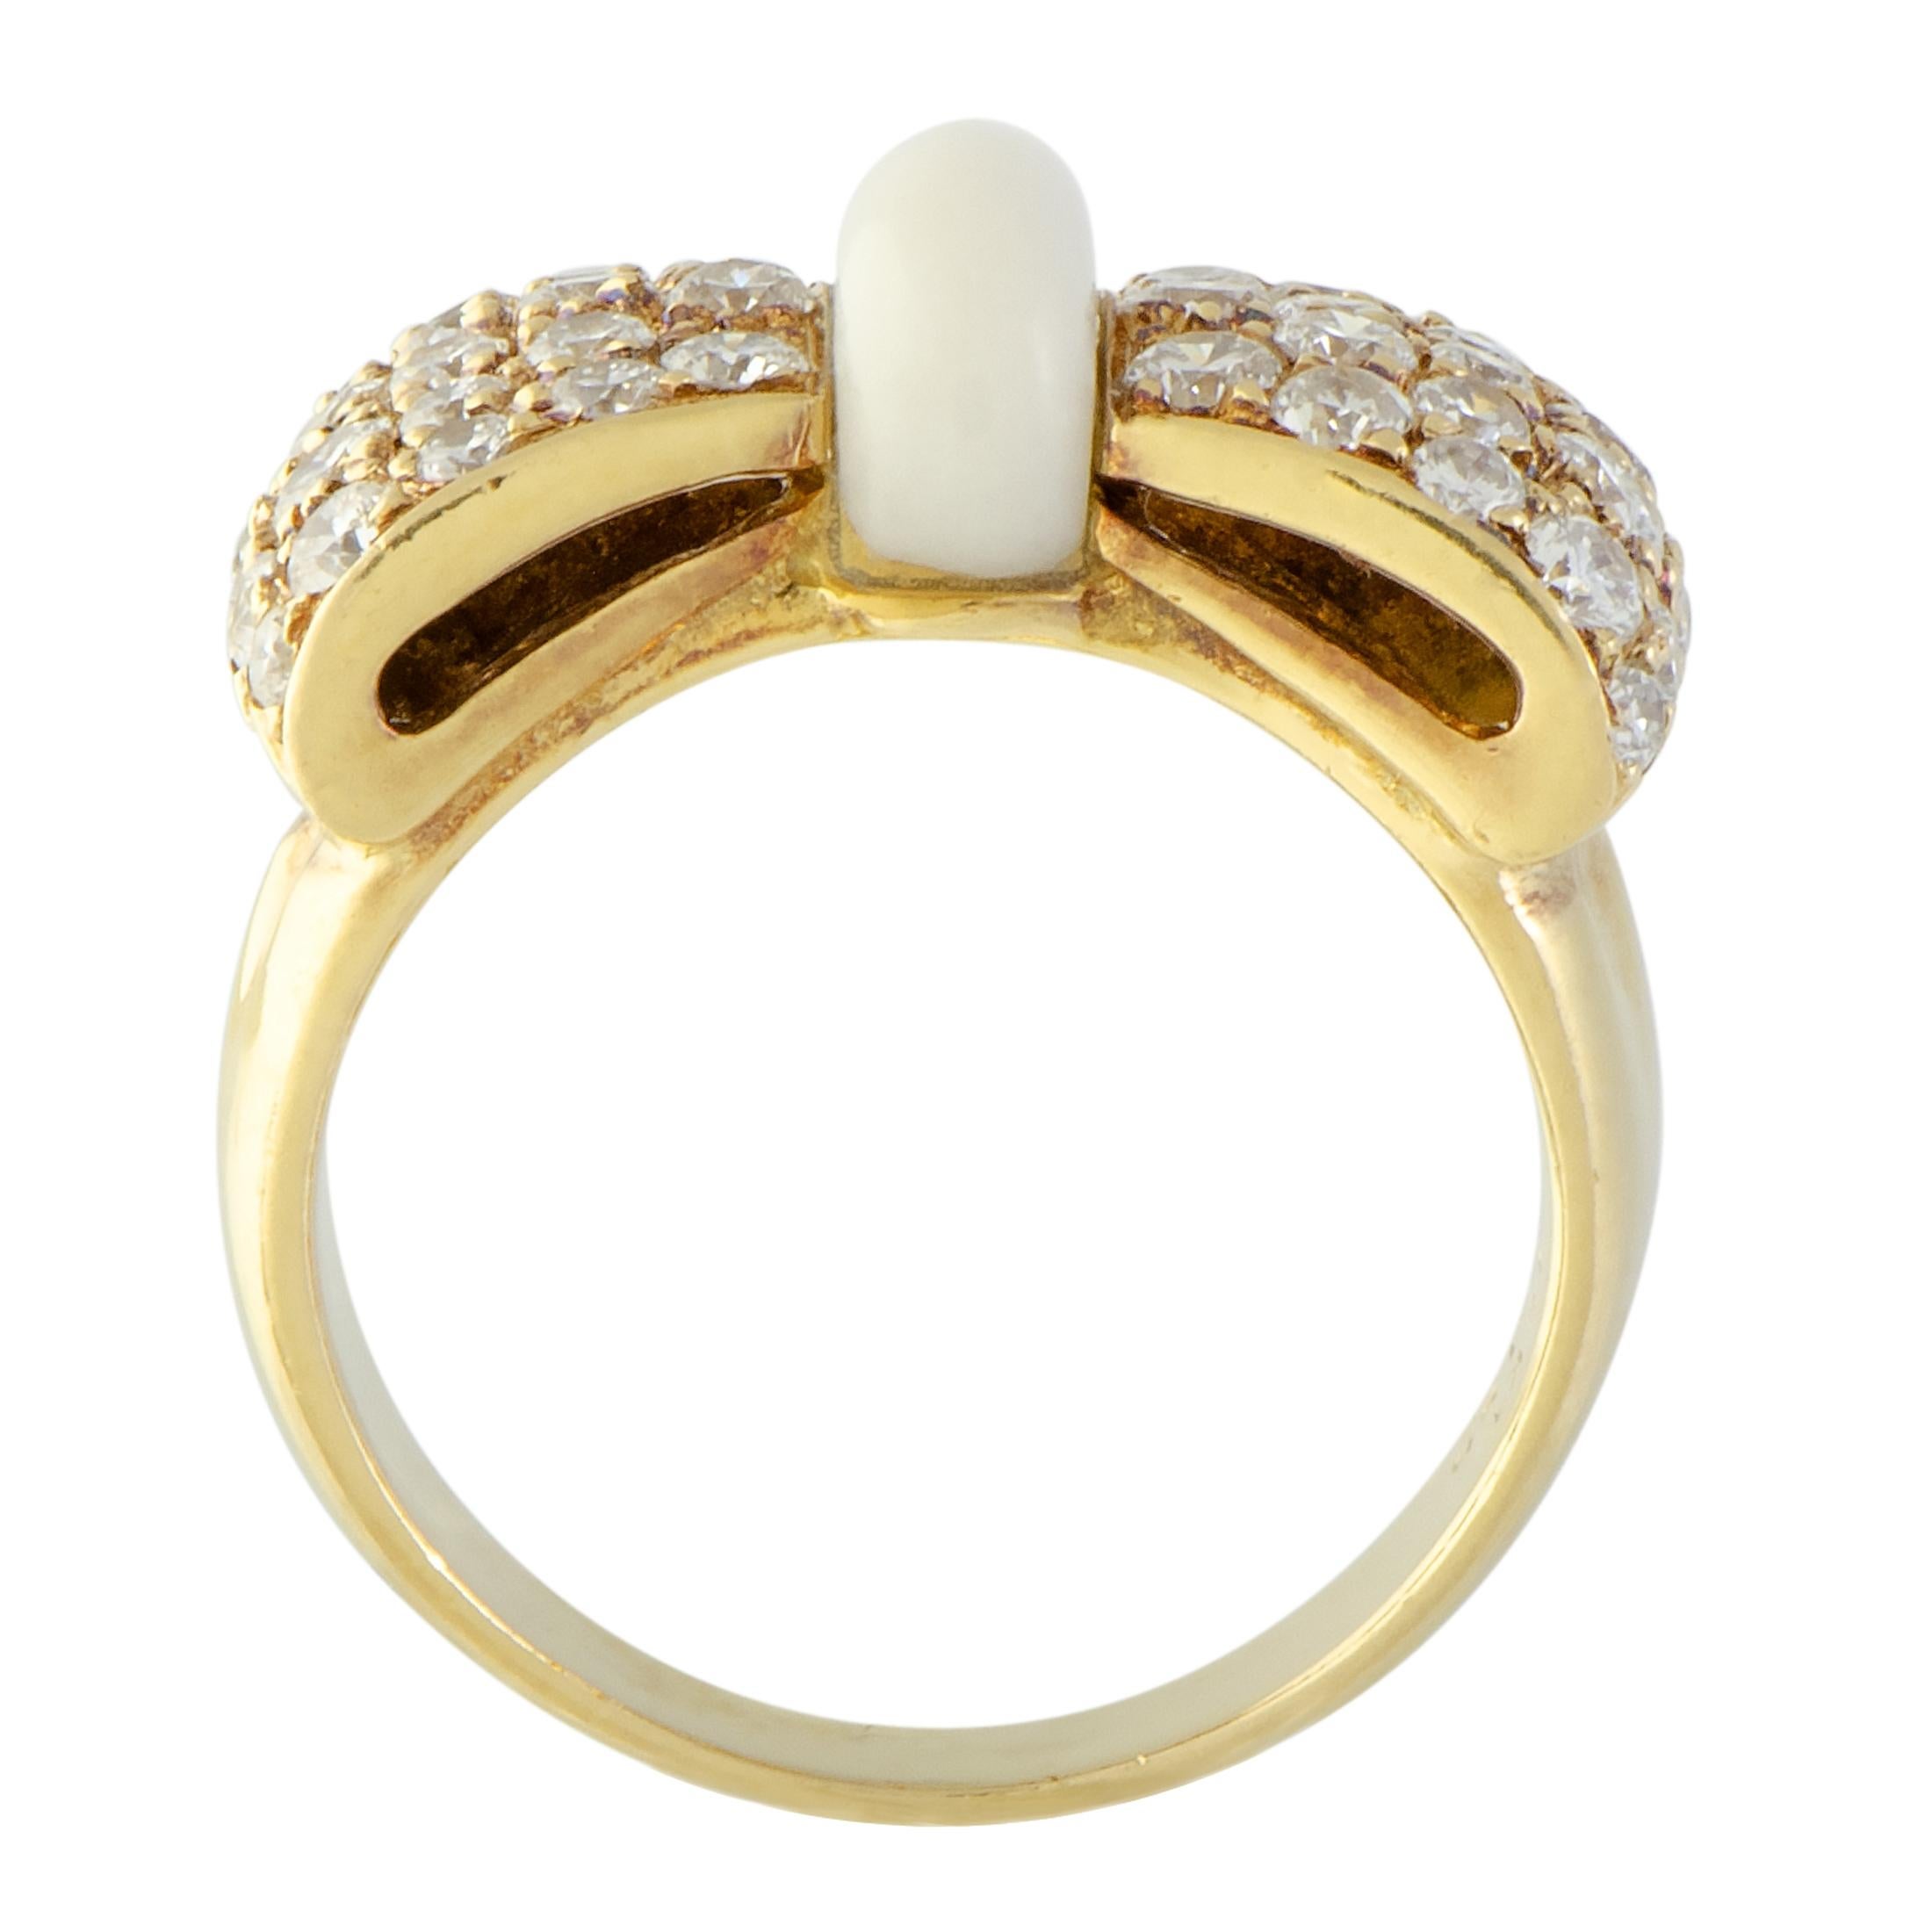 Given a gorgeously feminine appeal by the beautifully stylized and splendidly decorated bow motif, this exceptional 18K yellow gold ring from Van Cleef & Arpels will add a charming accent to any ensemble of yours. The ring is embellished with a